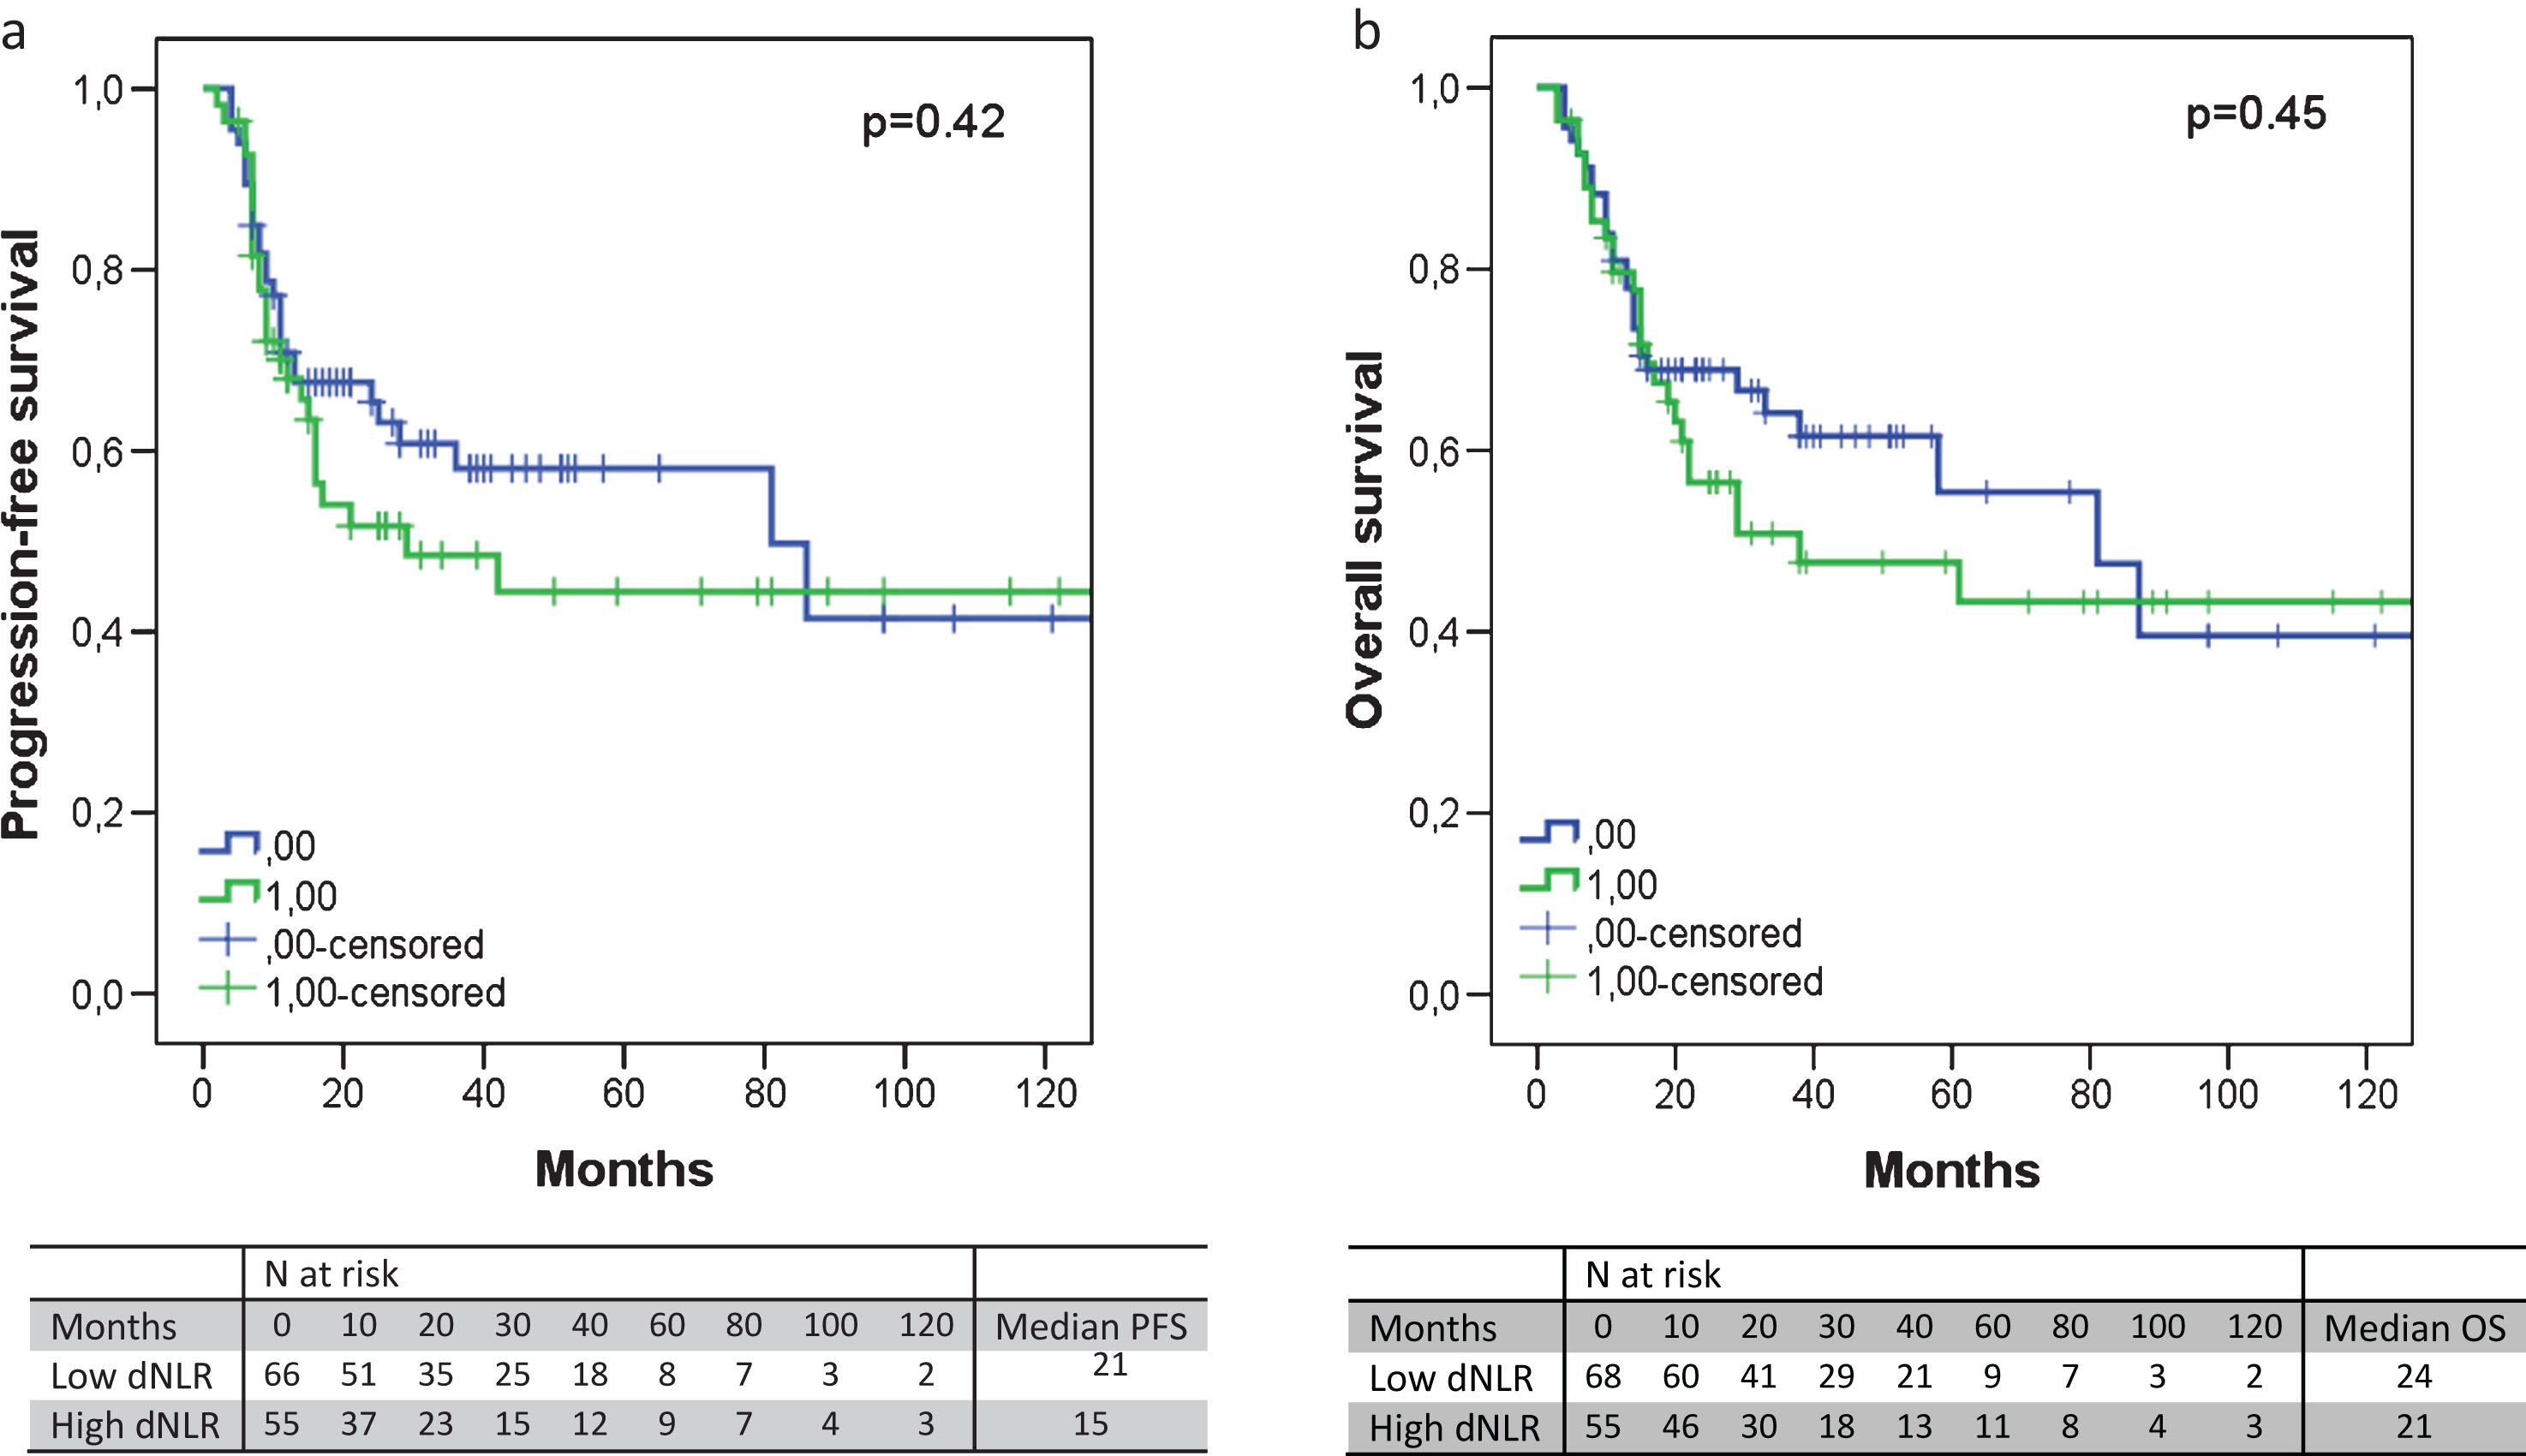 The progression-free survival (a) and overall survival (b) according to the dNLR. An elevated dNLR corresponded with an absolute shorter PFS (median 21 versus 15 months, p = 0.42) or OS (median 24 versus 21 months, p = 0.45), albeit not significantly.